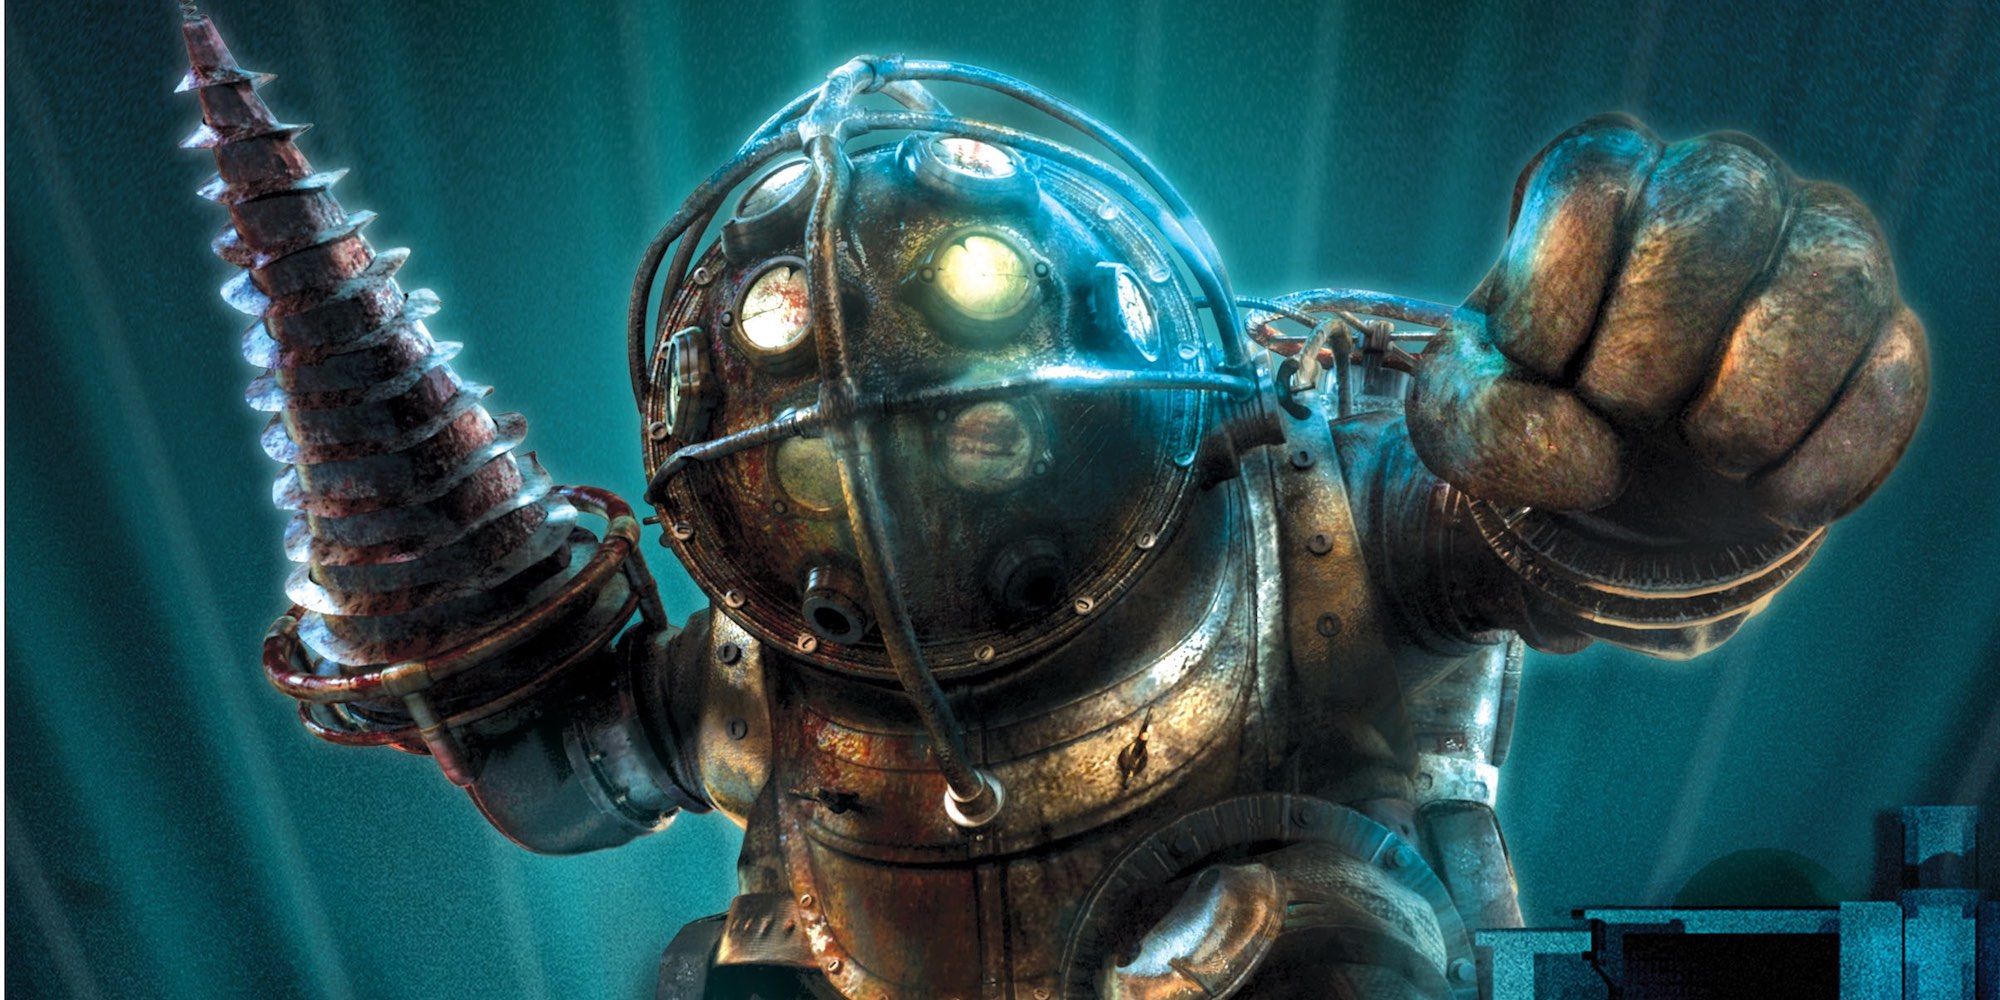 did the people who made system shock develop bioshock?